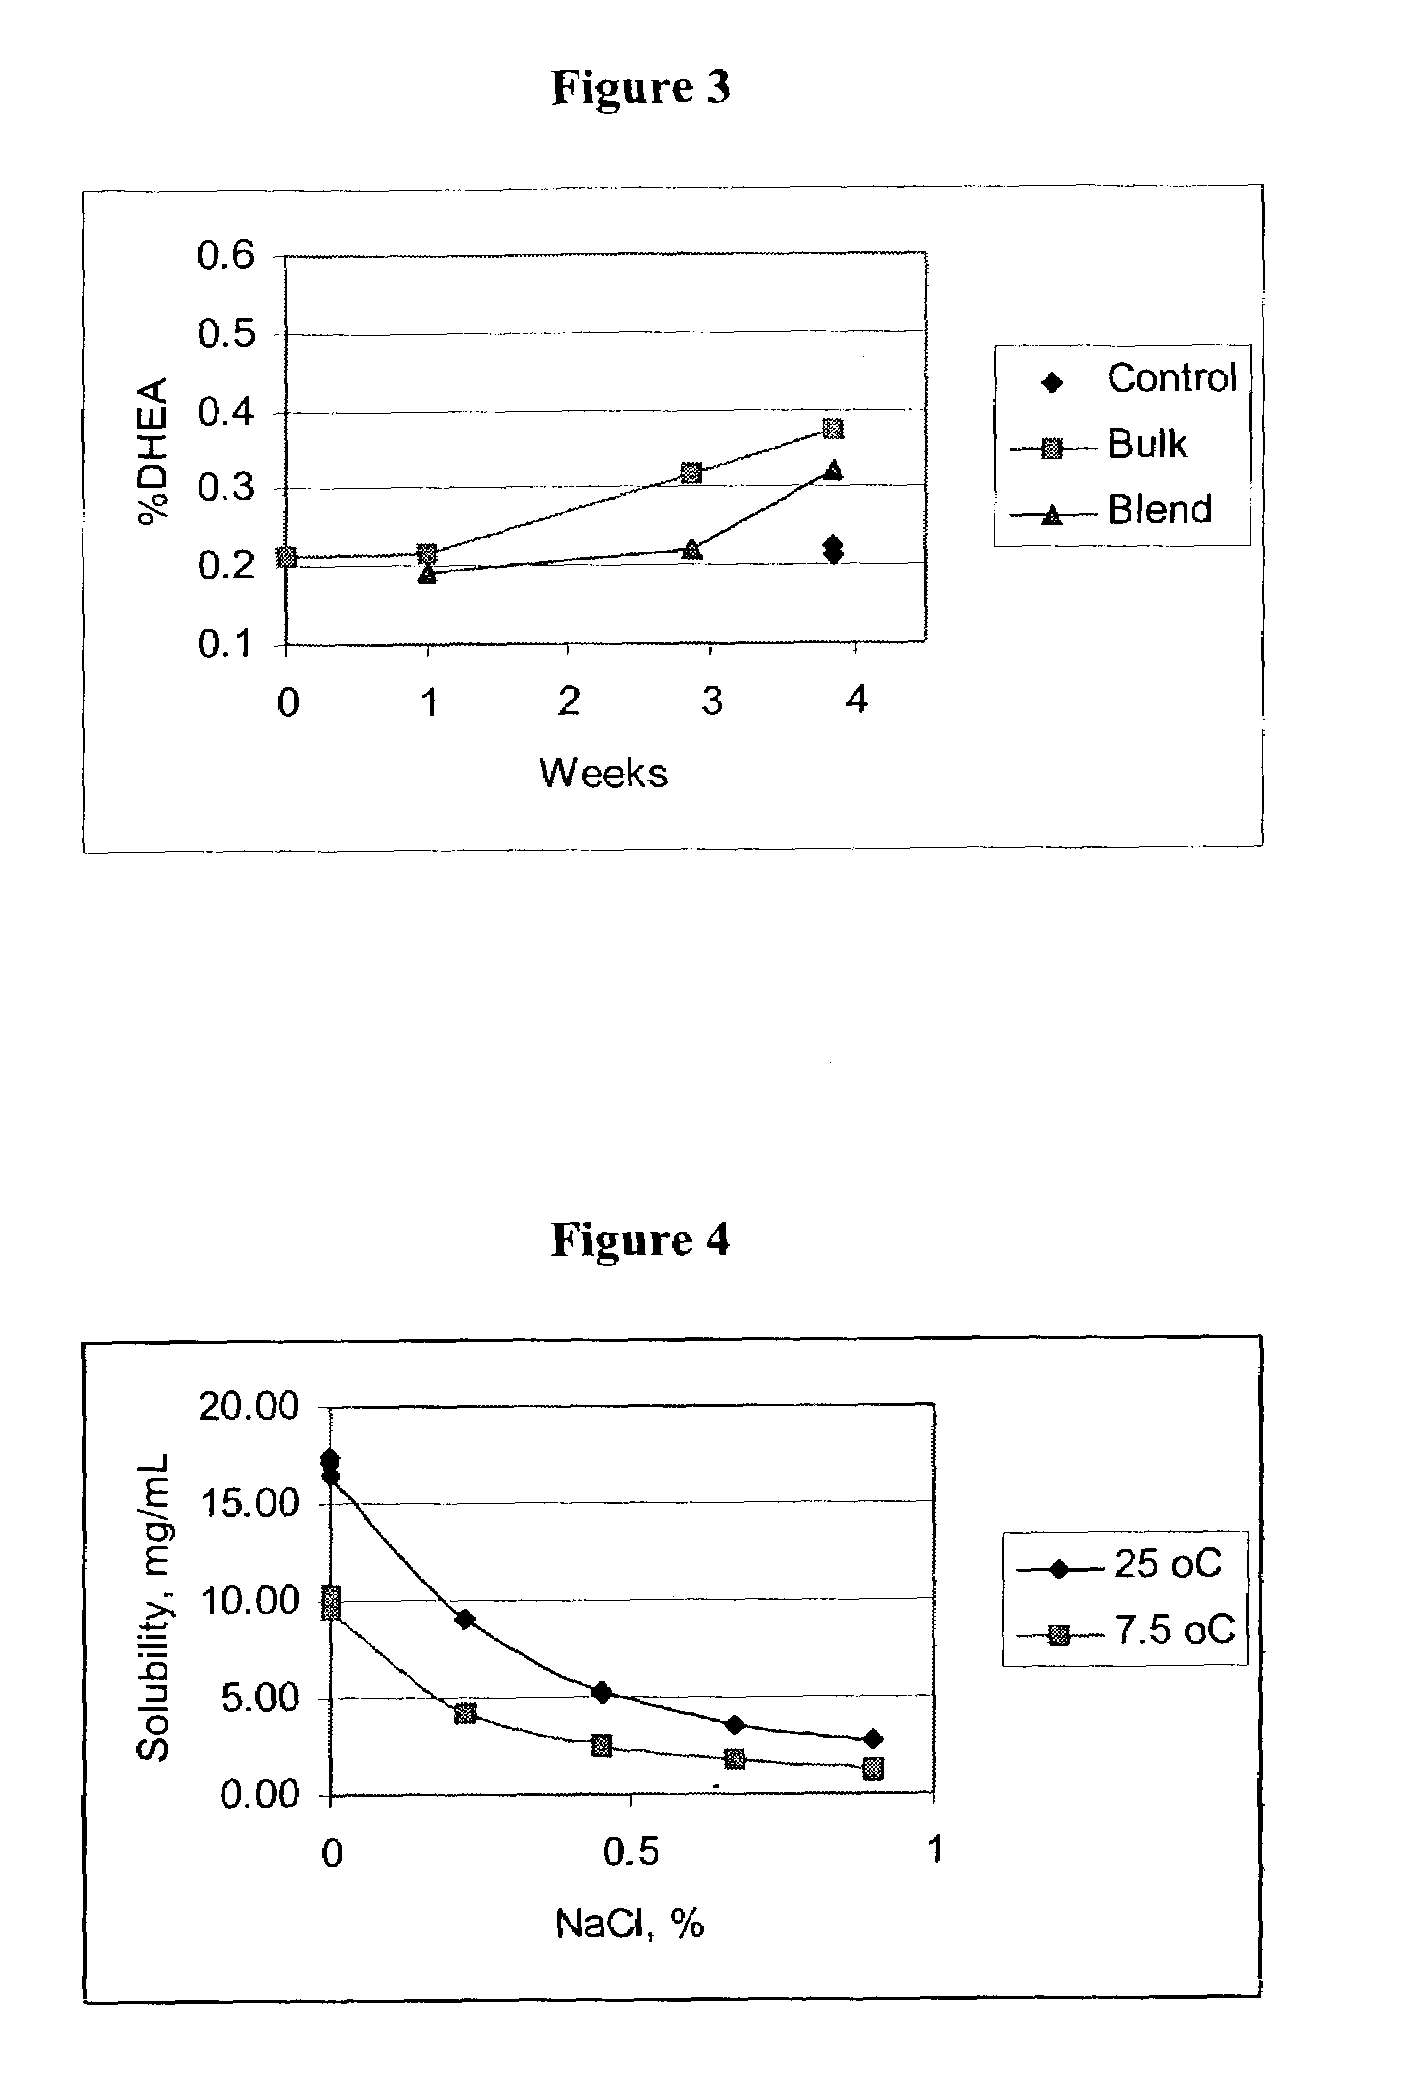 Nebulizer formulations of dehydroepiandrosterone and methods of treating asthma or chronic obstructive pulmonary disease using compositions thereof